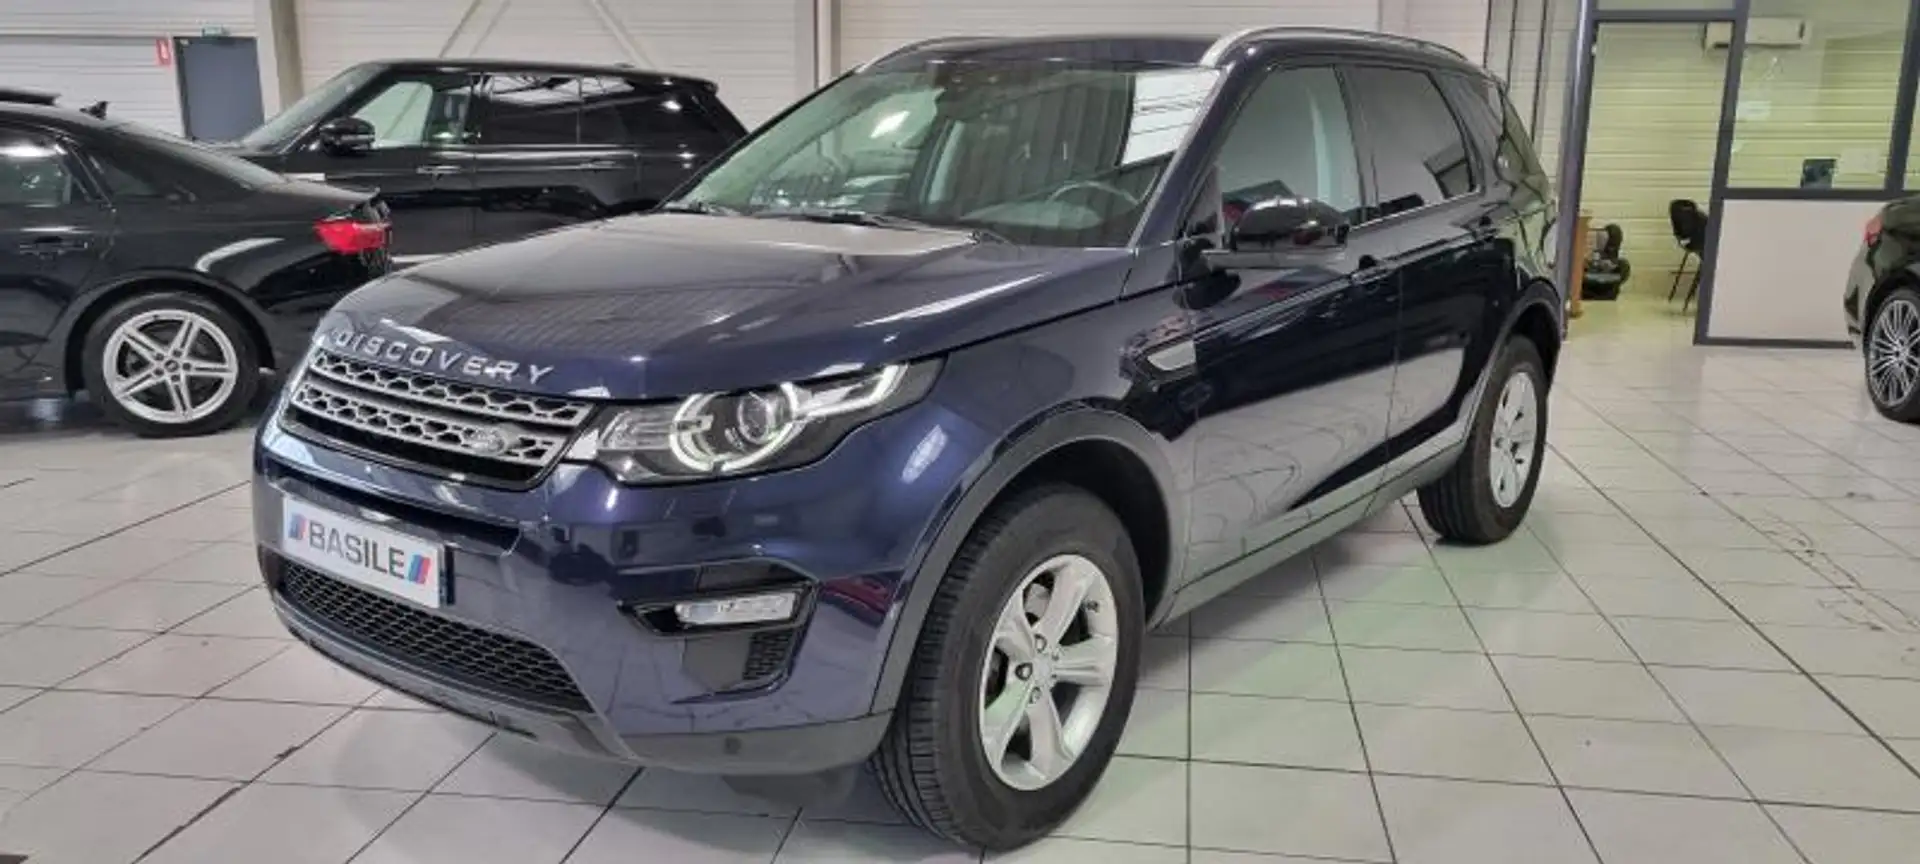 Land Rover Discovery sport 2.0 td4 180 se 4wd 7 places - 1